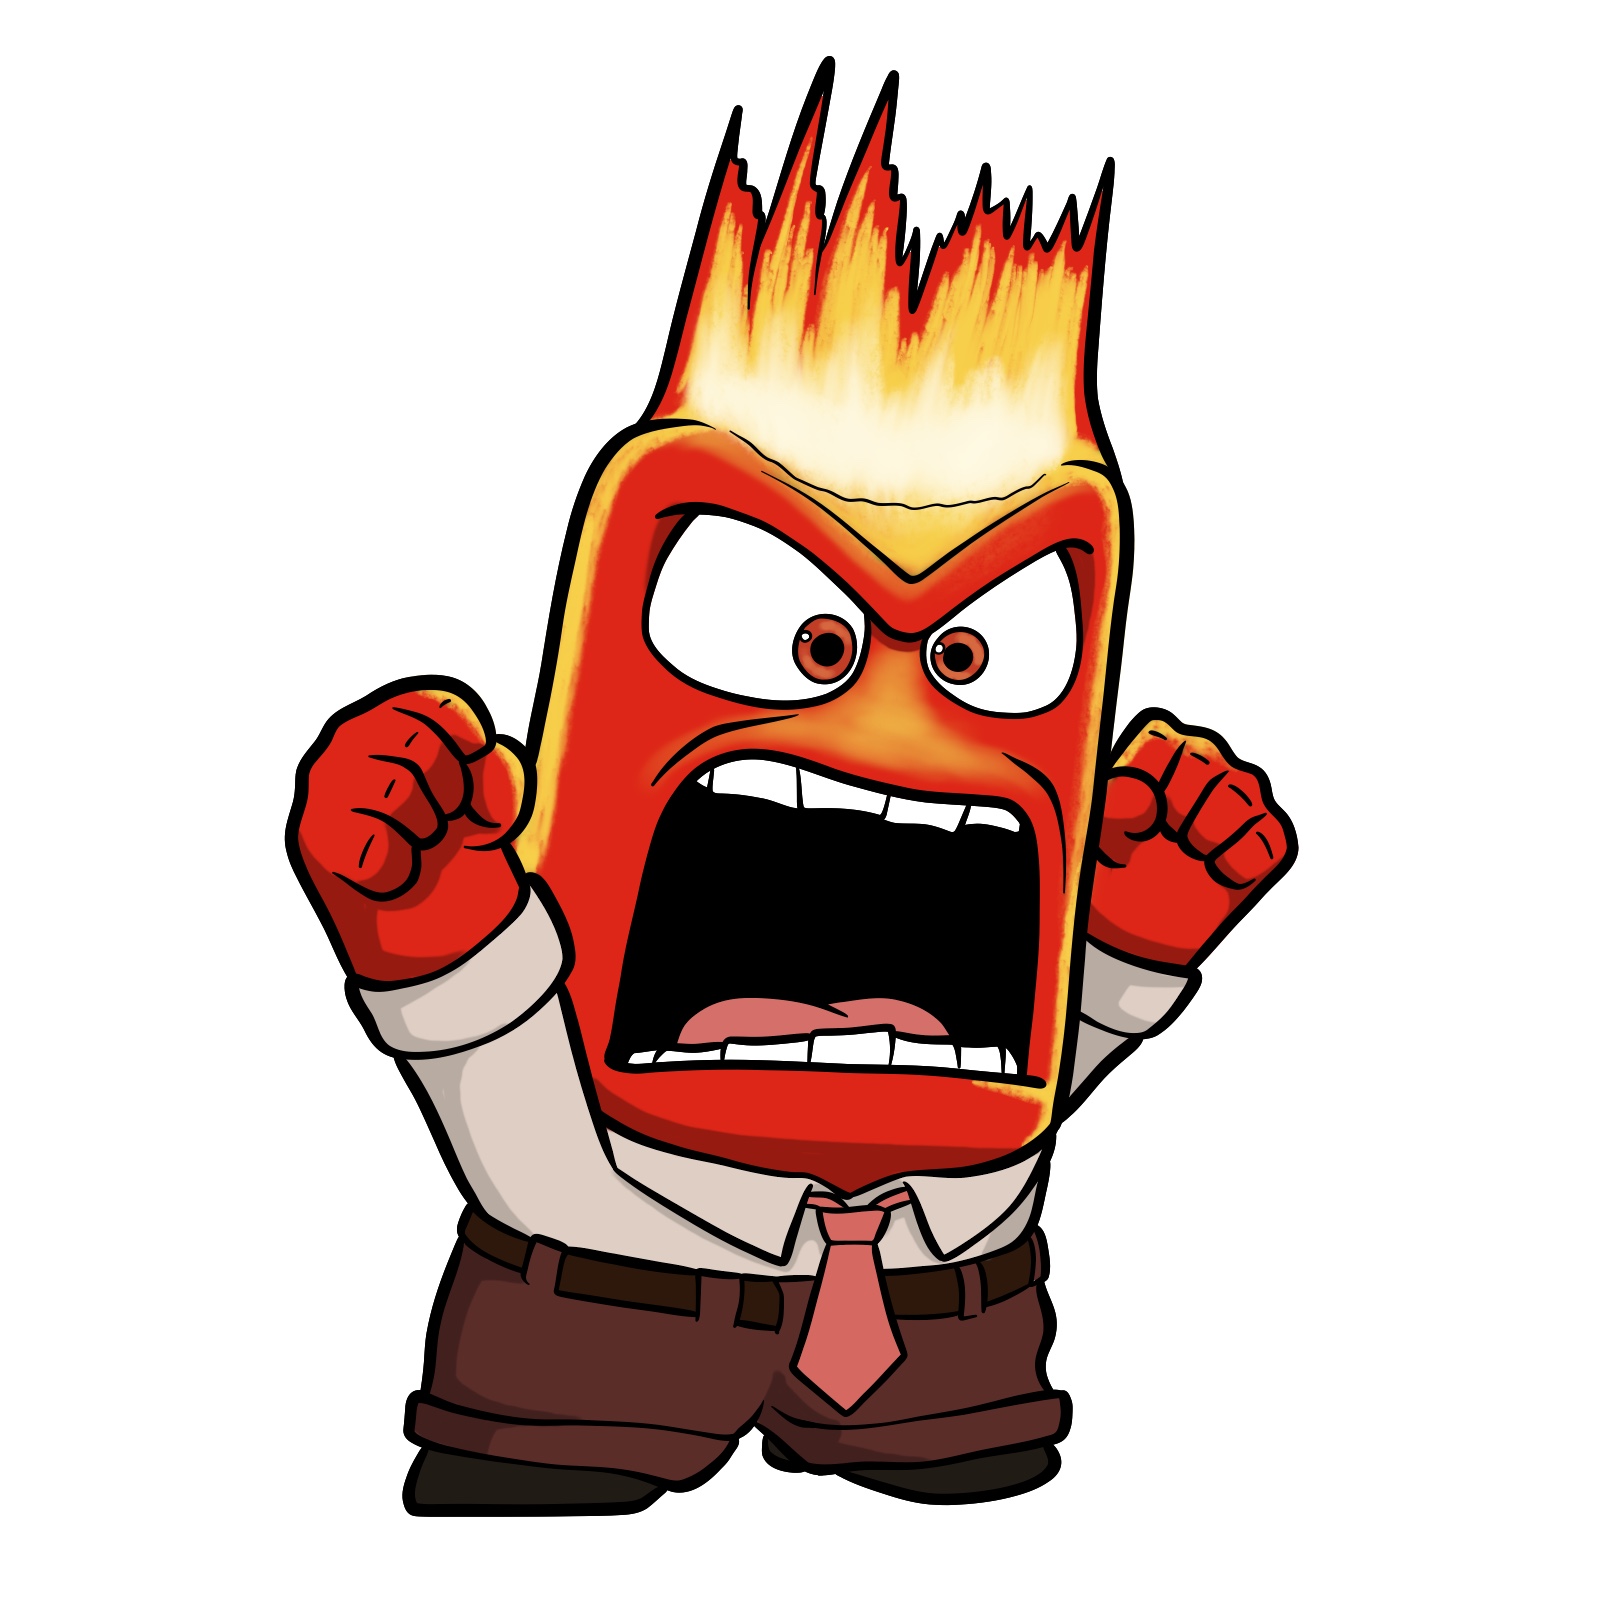 Easy drawing of Anger with his head in flames from Inside Out